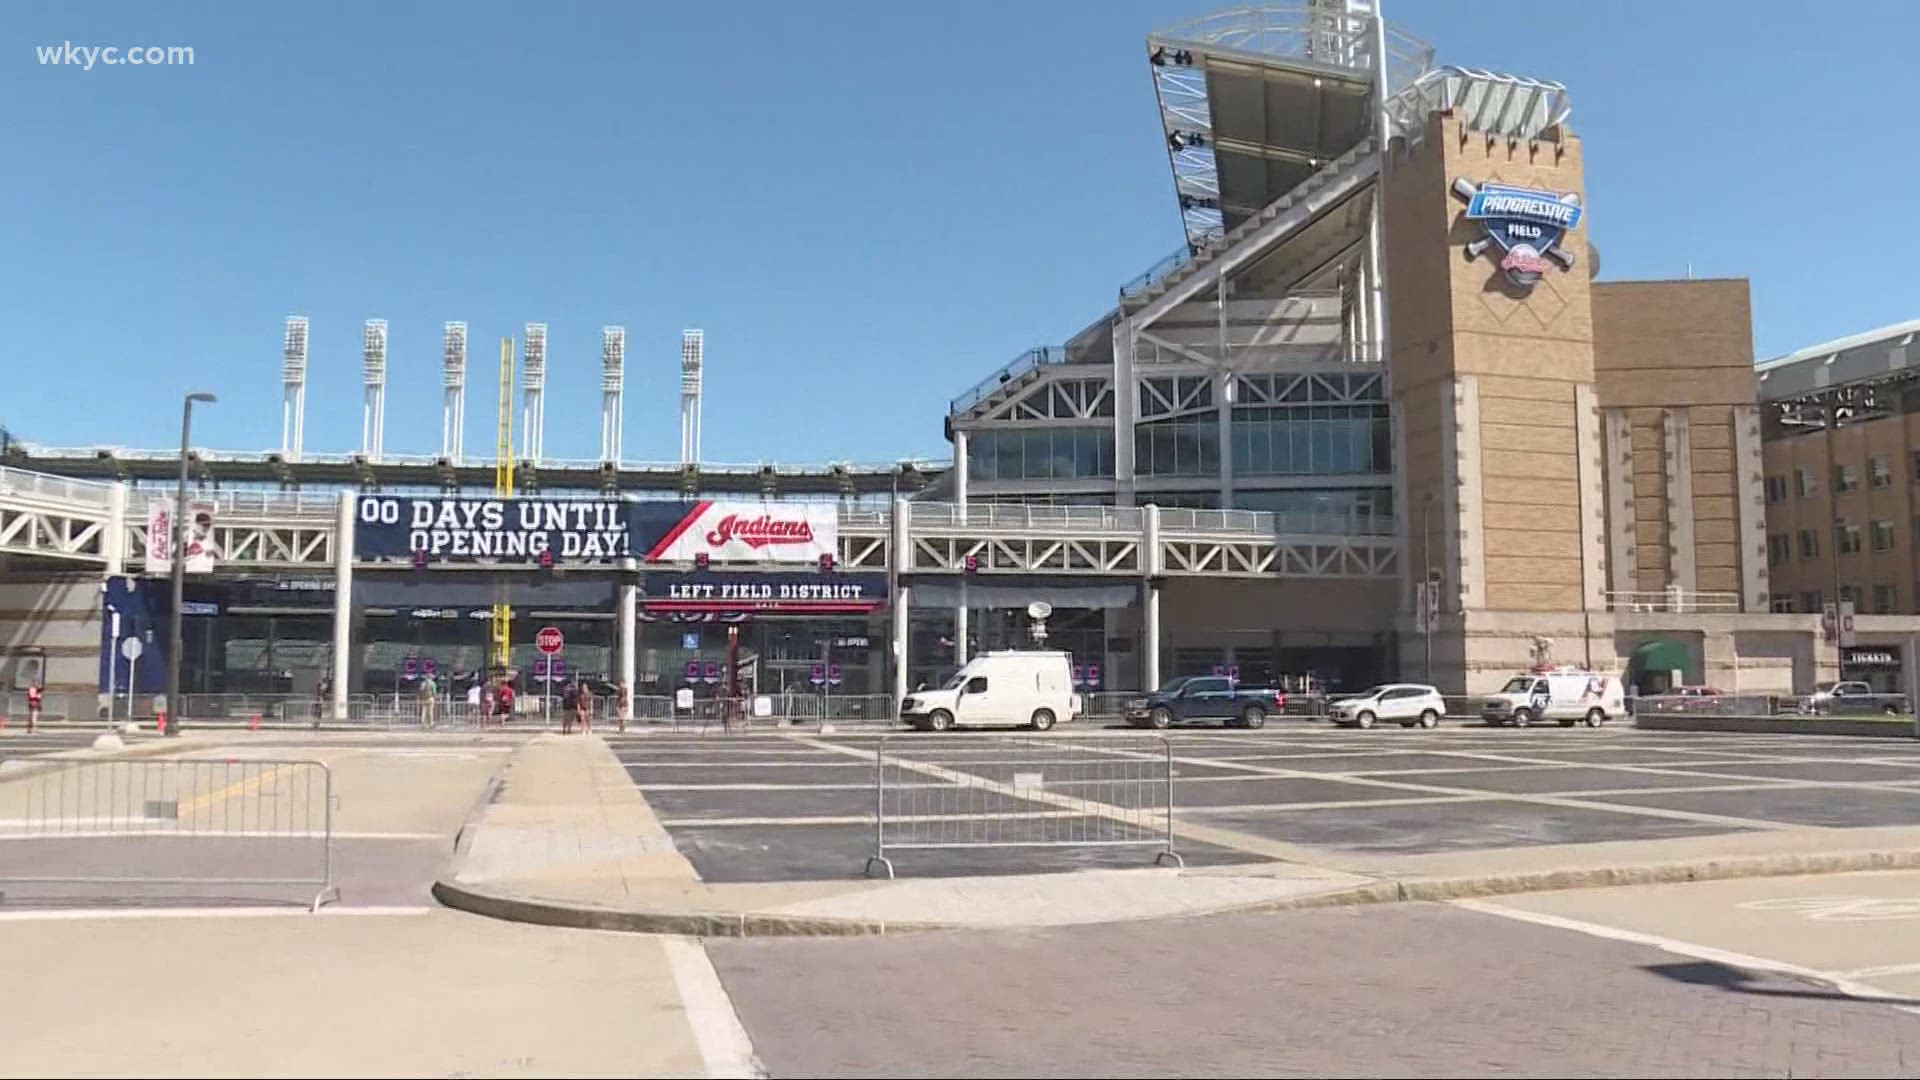 Downtown Cleveland bars limit fans on Opening Day due to the coronavirus.  Brandon Simmons has more on this.